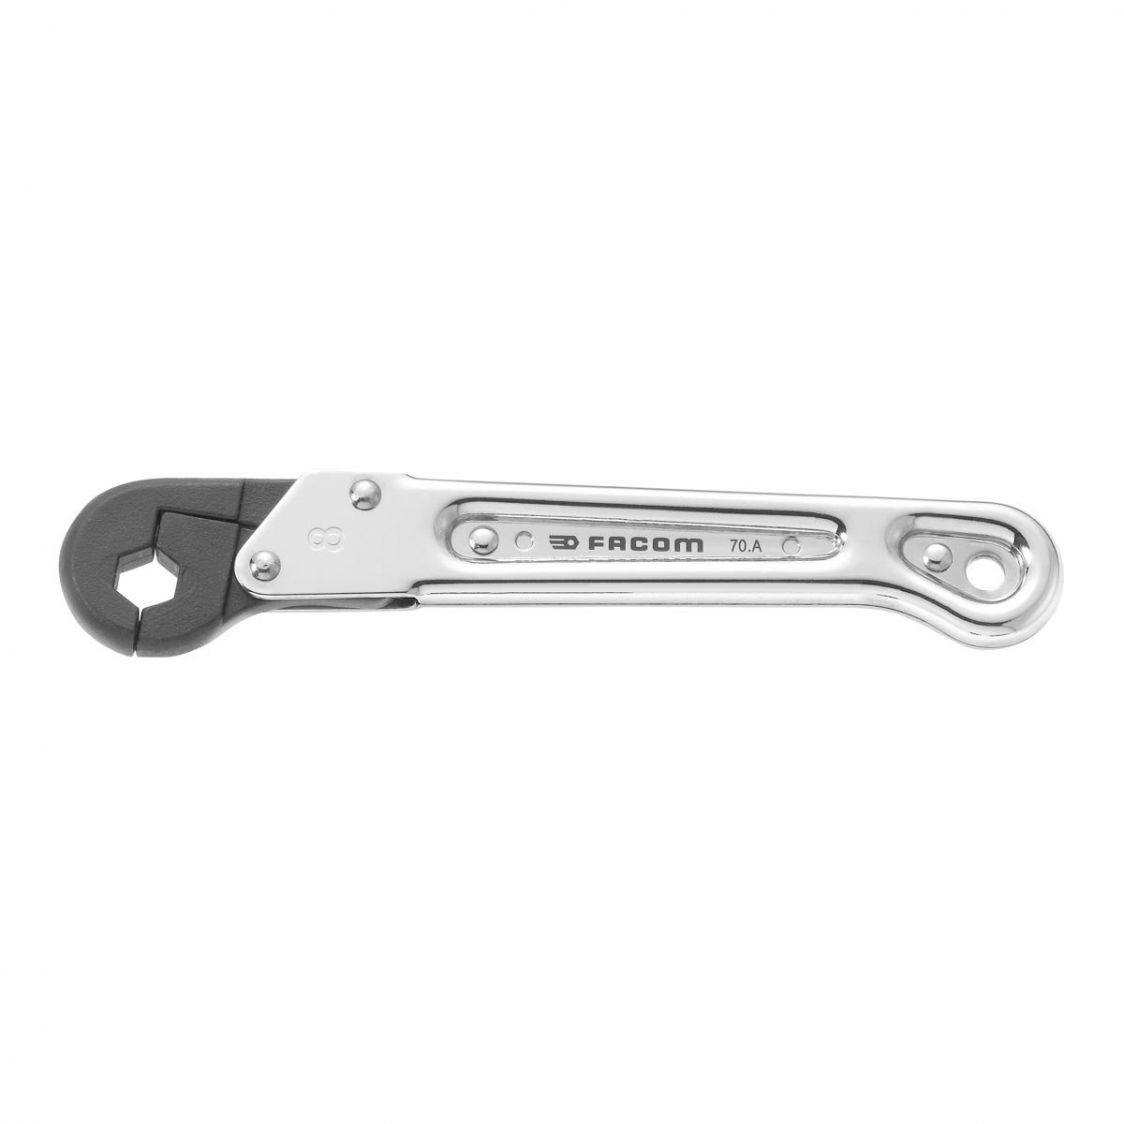 FACOM 70A.18 - 18mm Metric Ratchet Flare Nut Spanner